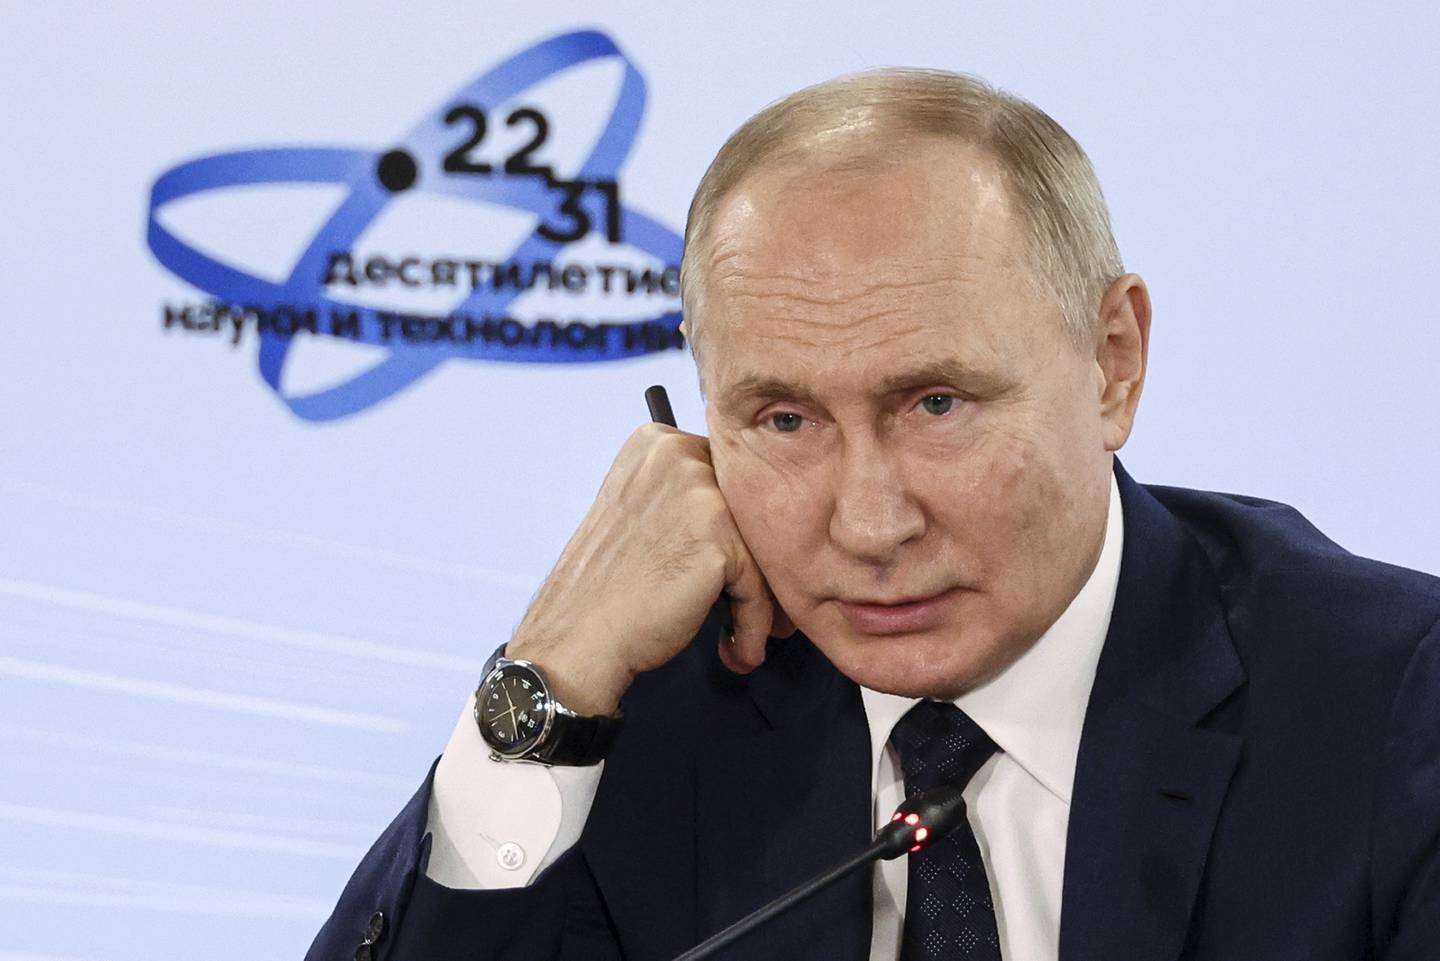 Russian President Vladimir Putin attends a meeting with participants of the 3rd Young Scientists Congress at the Sirius Park of Science and Art in Sochi, Krasnodar region of Russia, Wednesday, Nov. 29, 2023. (Mikhail Klimentyev, Sputnik, Kremlin Pool Photo via AP)